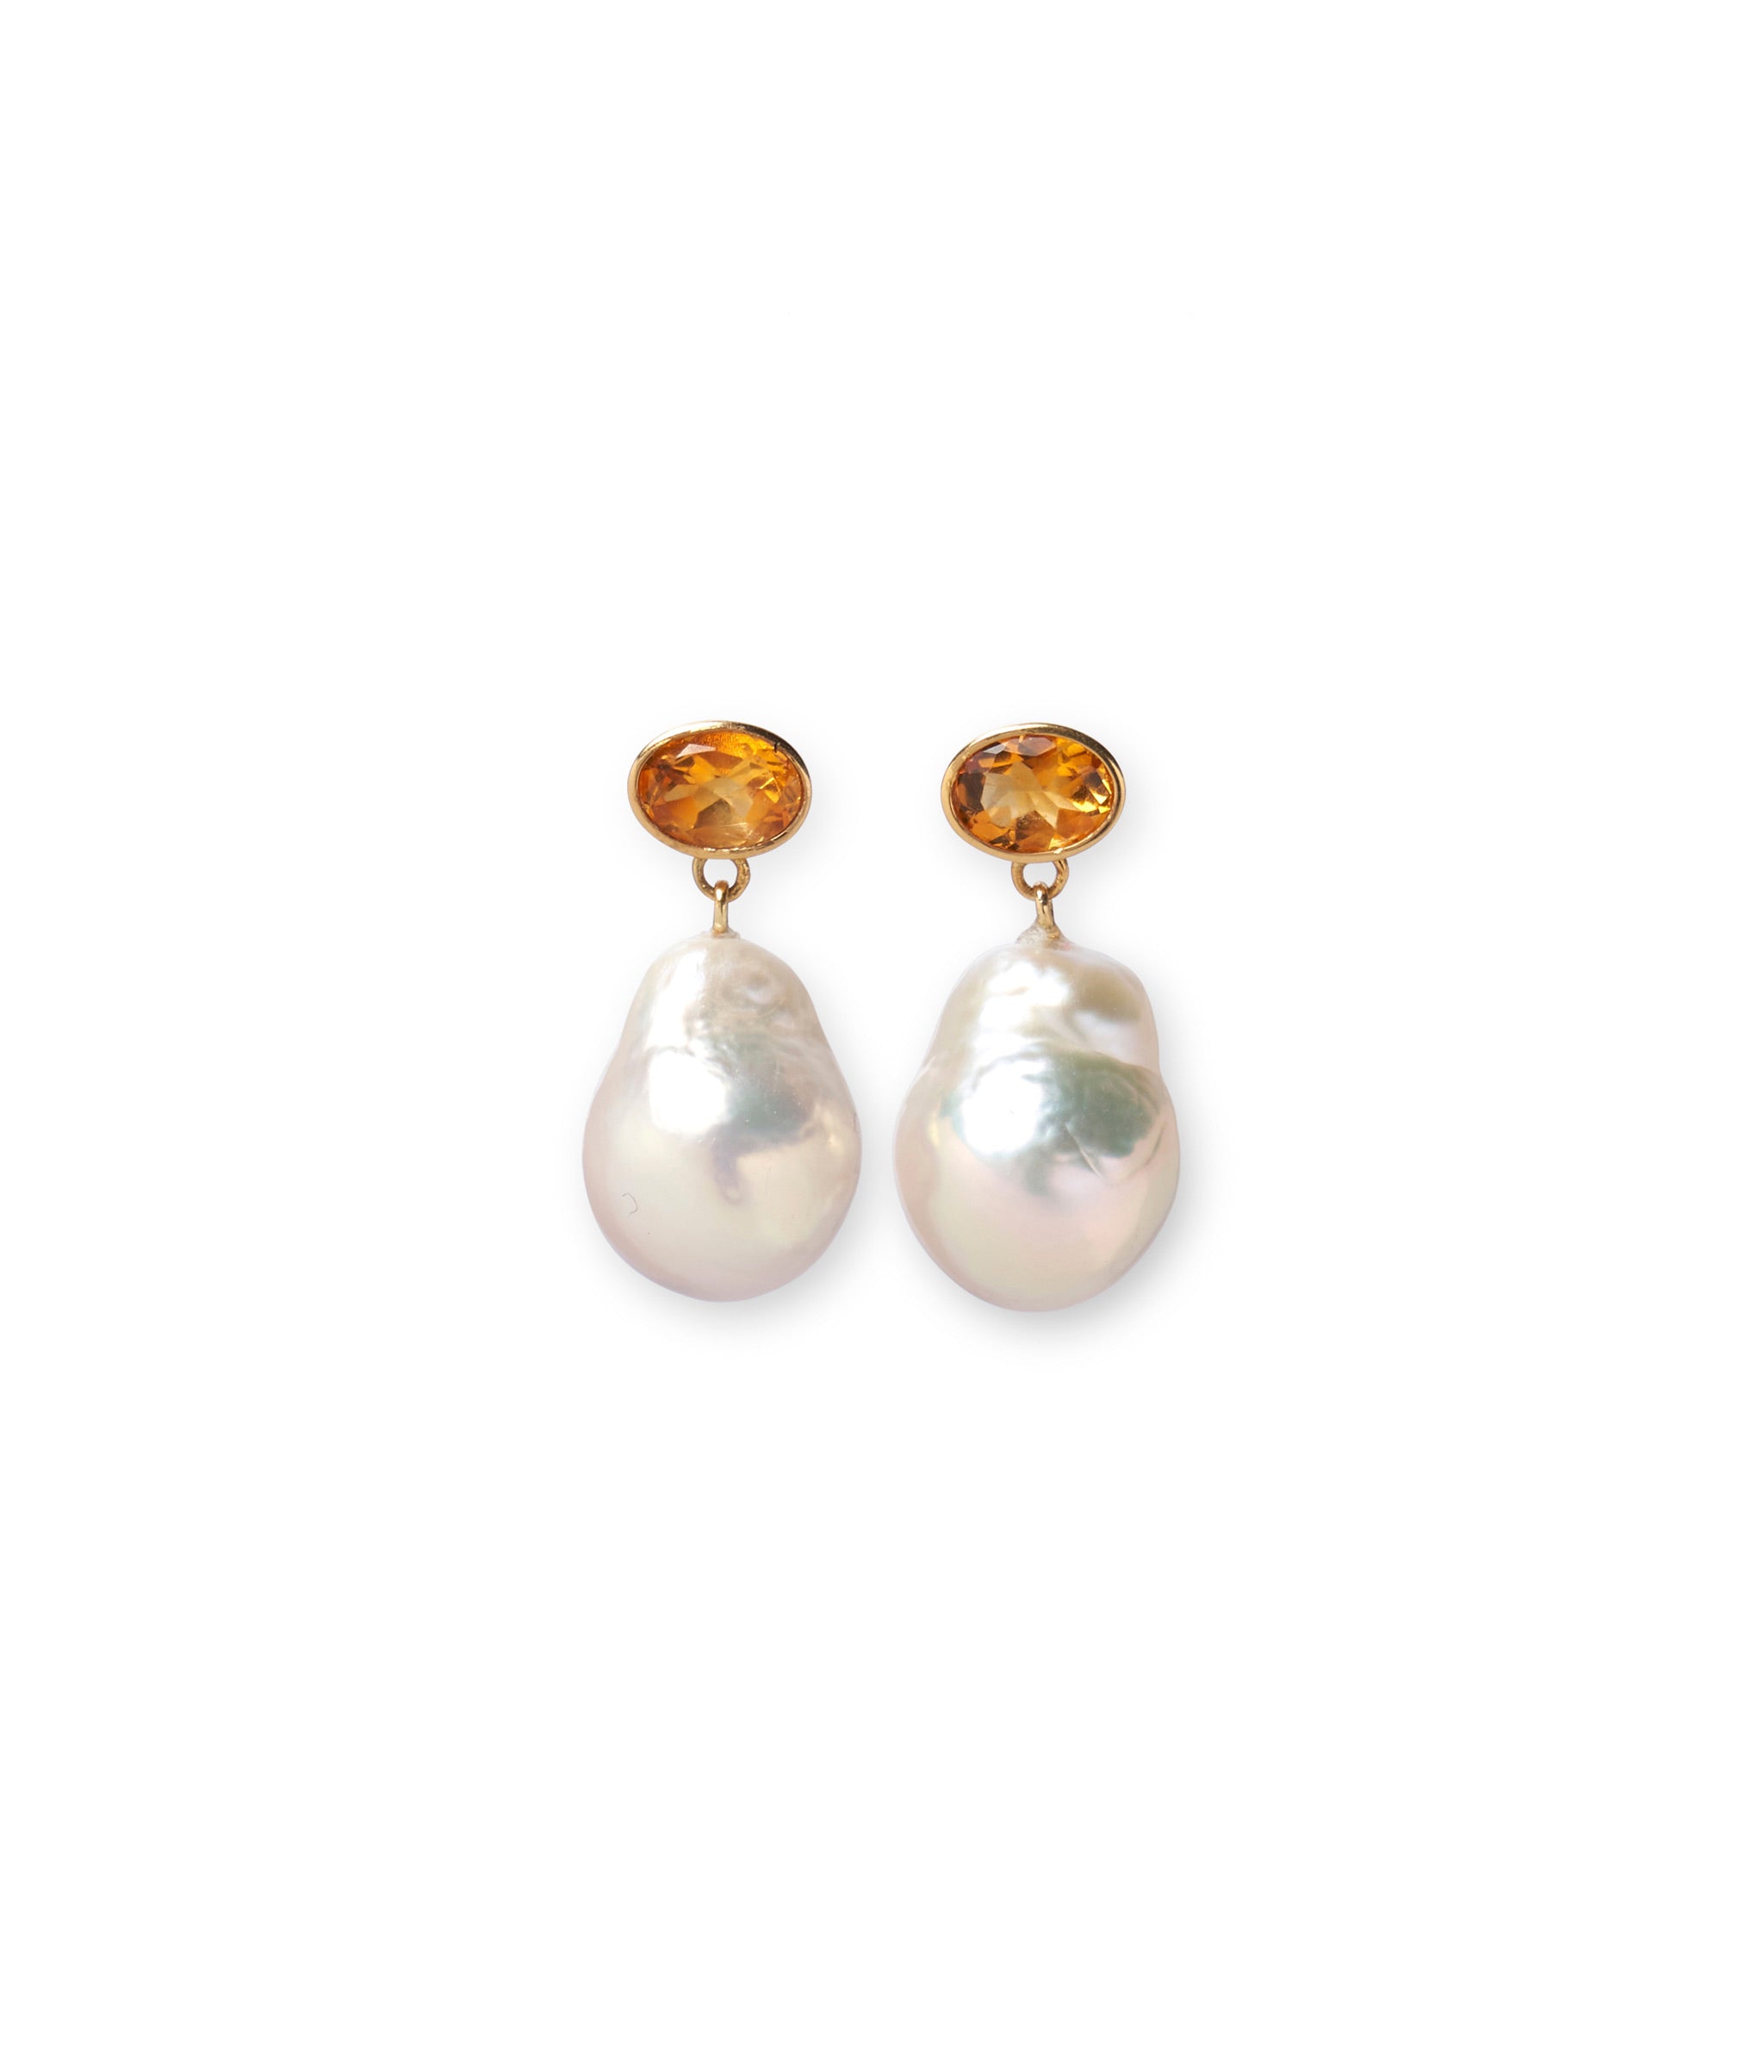 14k gold earrings with faceted semiprecious citrine tops and hanging baroque pearl drops.